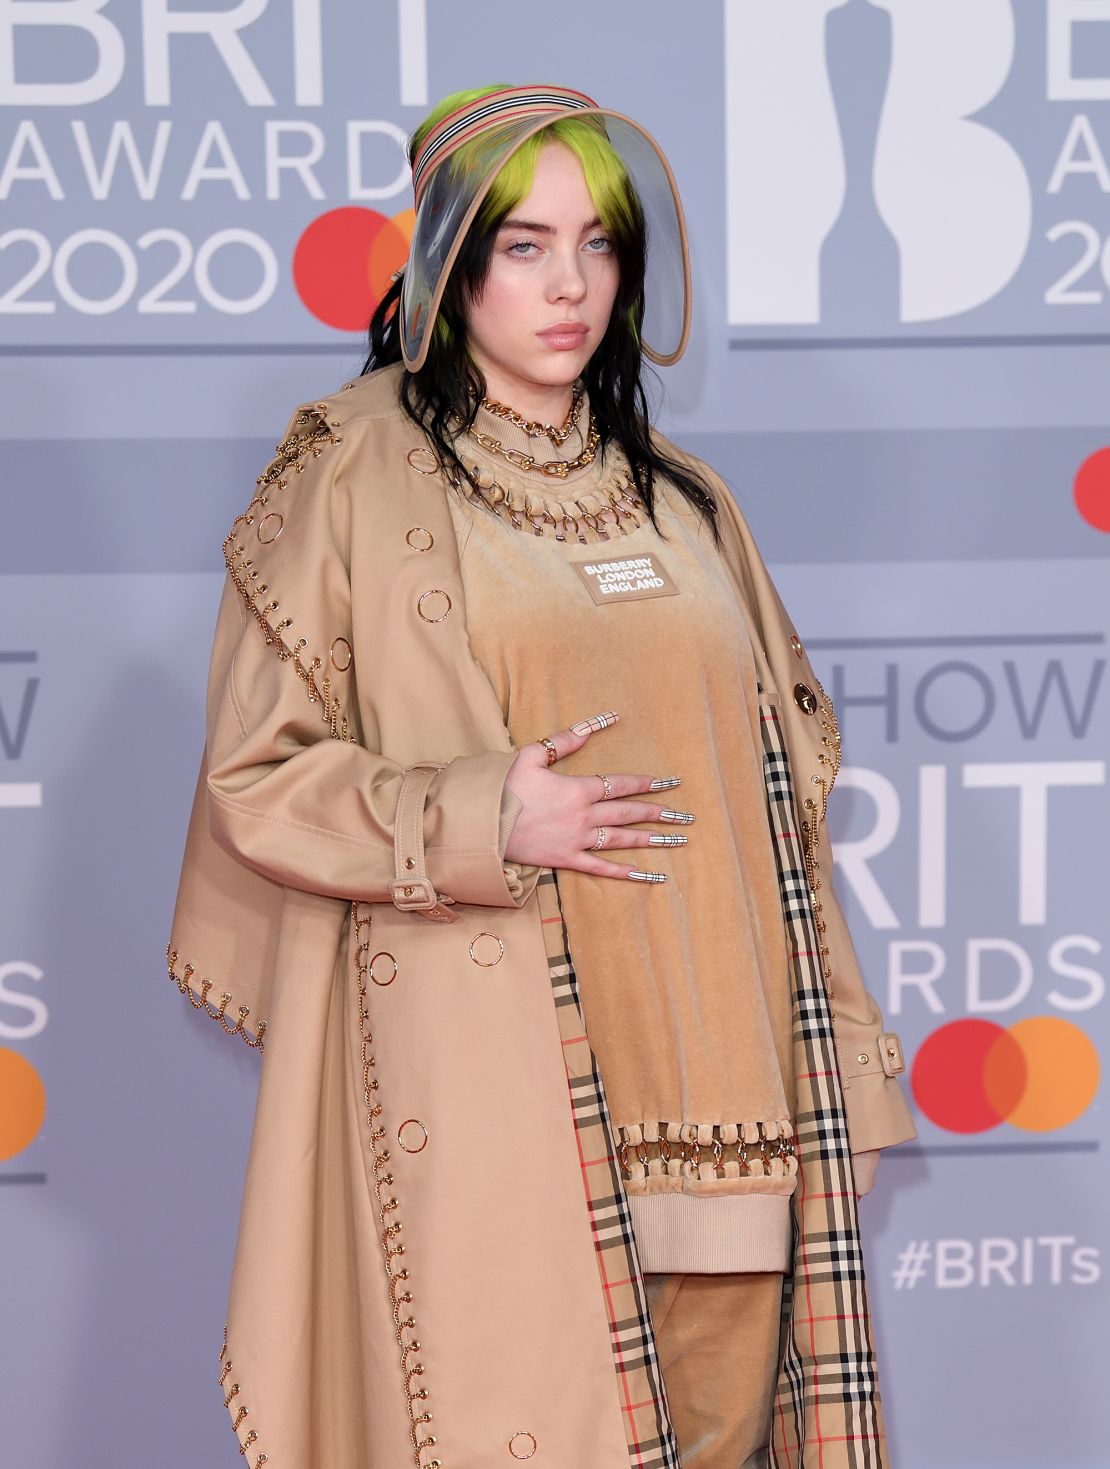 Billie Eilish attends The Brit Awards on February 18, 2020 in London, England.